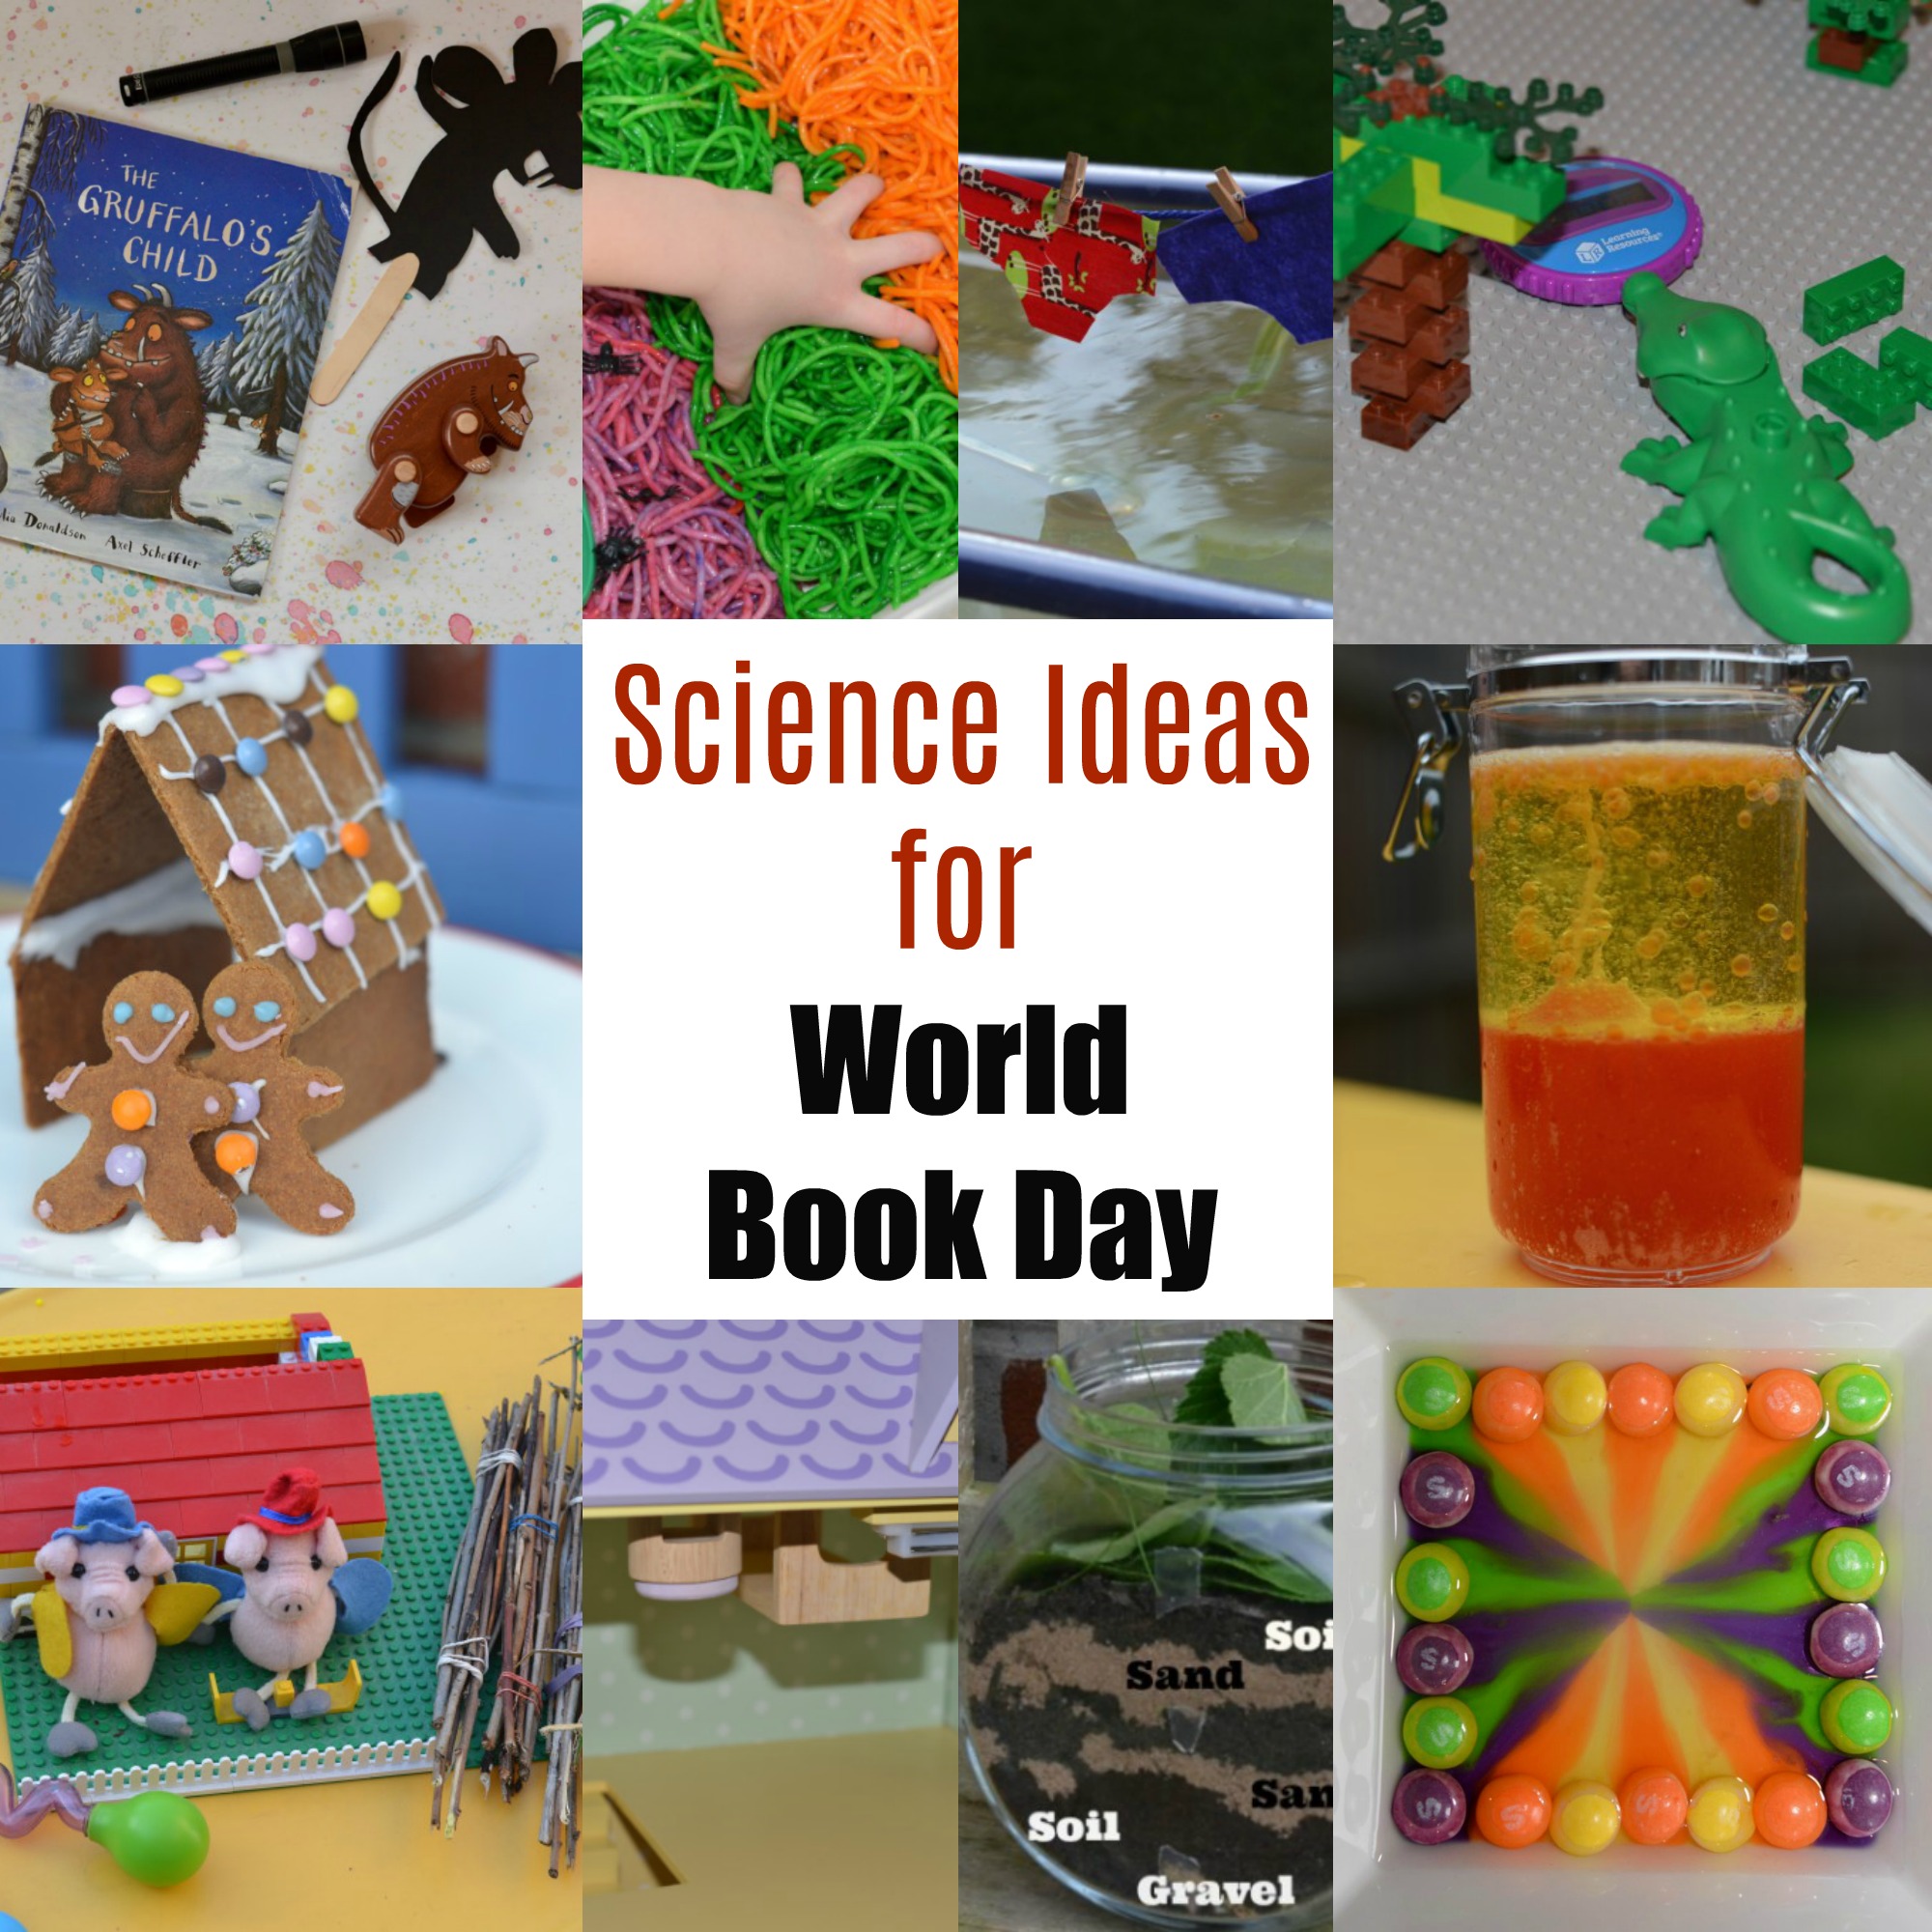 https://www.science-sparks.com/wp-content/uploads/2019/02/World-Book-Day-Activity-IDeas.jpg